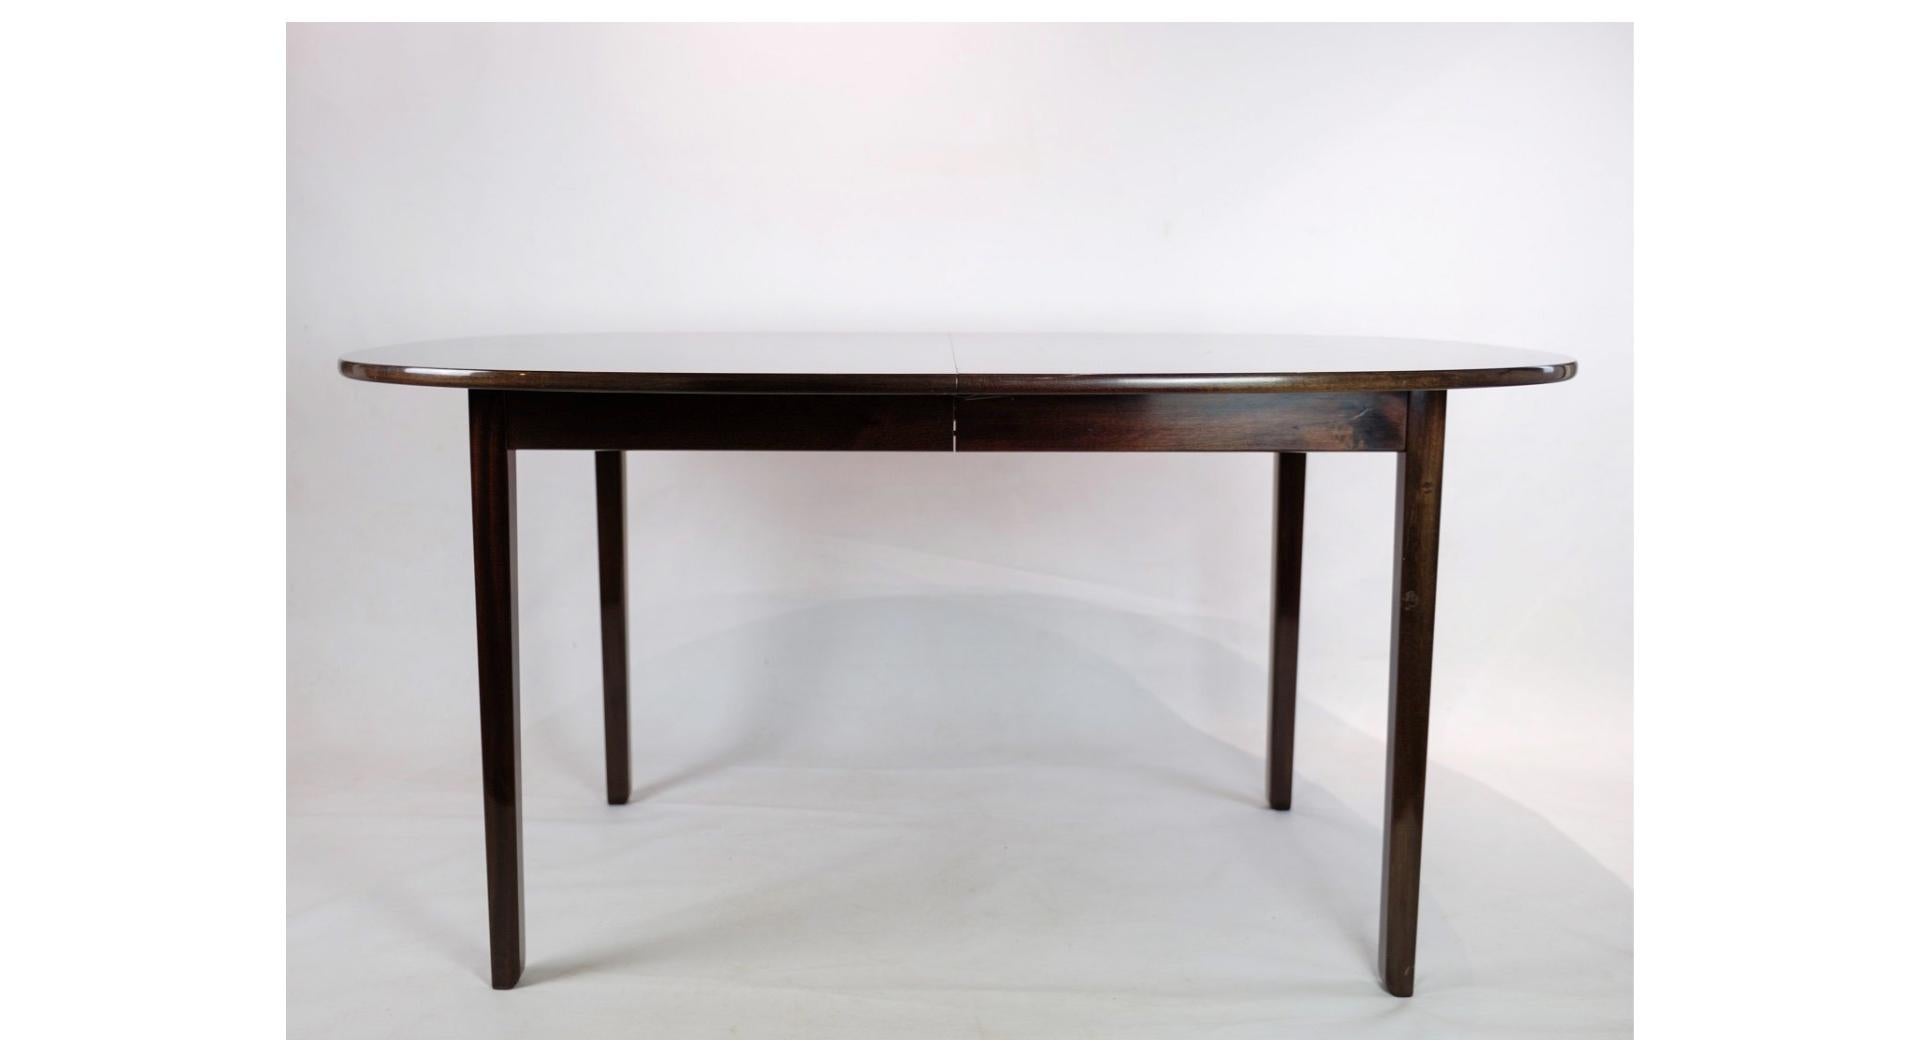 The mahogany dining table, designed by the renowned Ole Wanscher and produced by P. Jeppesen in 1960, represents an elegant and timeless piece of Danish furniture design.

The mahogany wood used in the table adds a classy and warm atmosphere to any